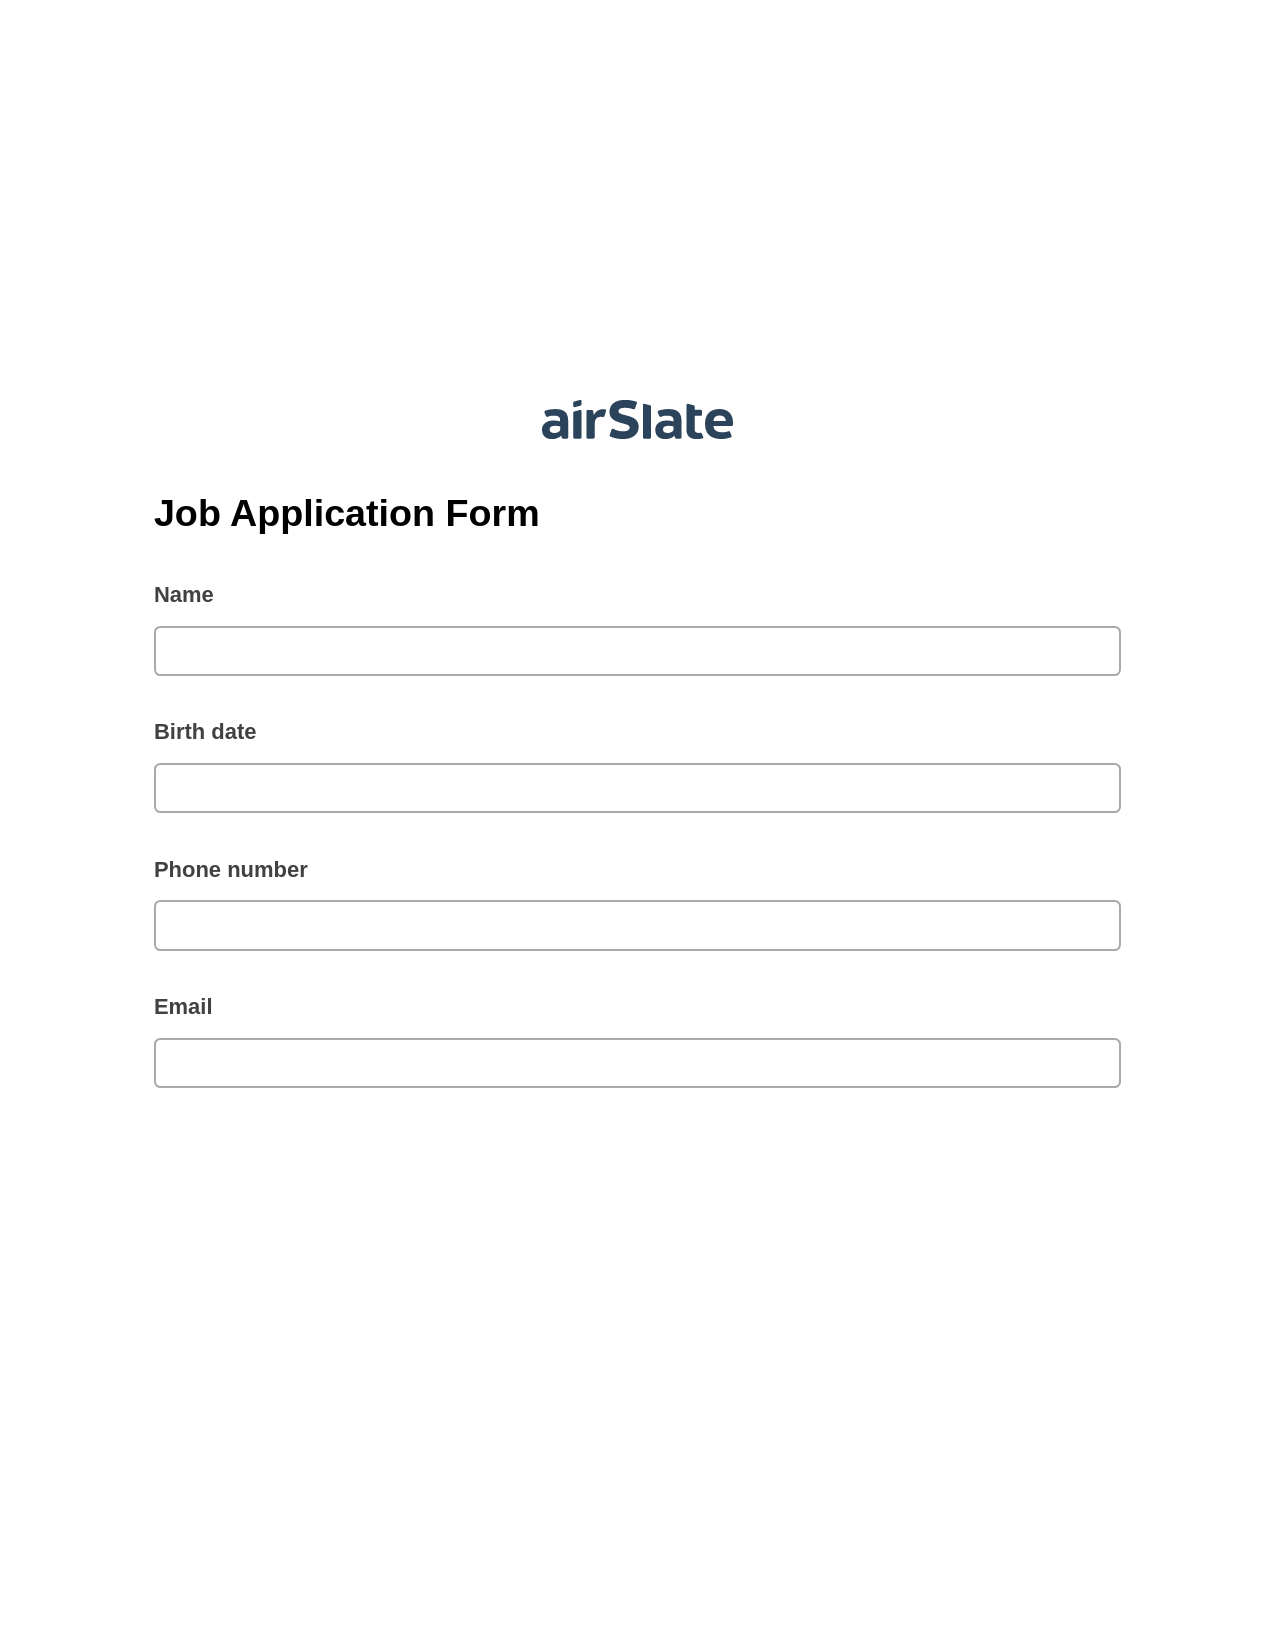 Multirole Job Application Form Pre-fill from Google Sheets Bot, Text Message Notification Bot, Export to Formstack Documents Bot